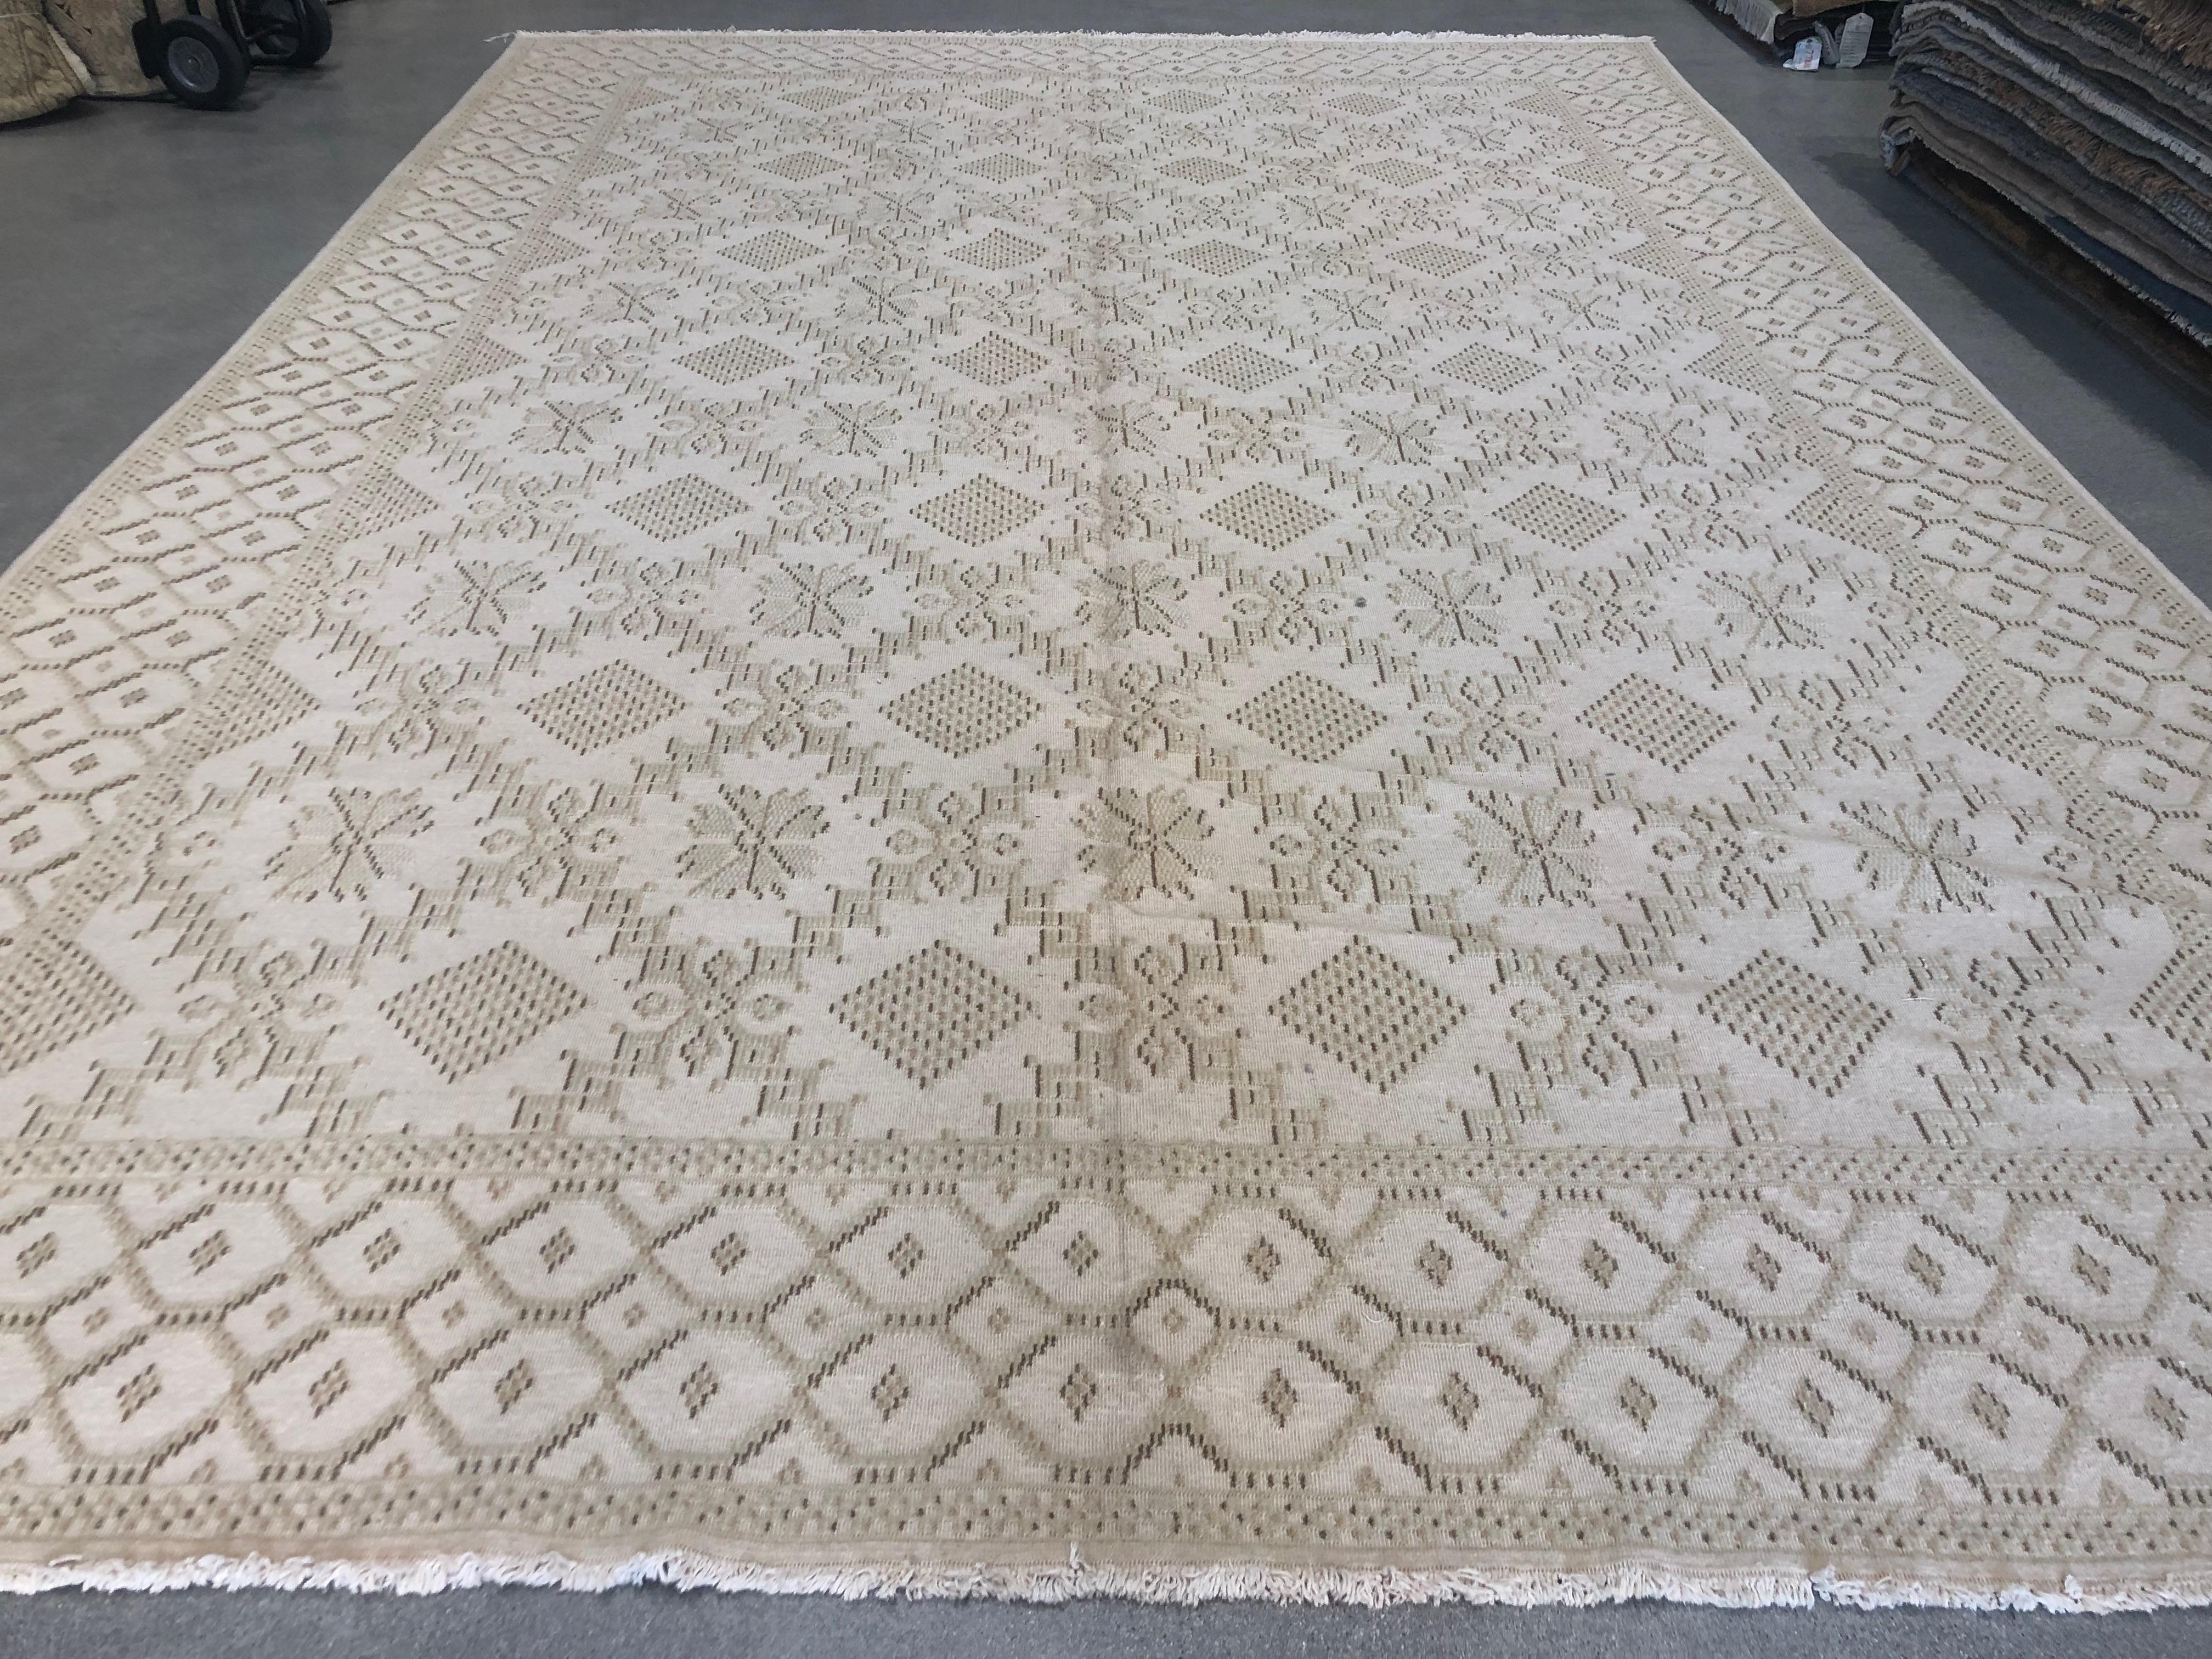 This elegant European Design collection rug brings to mind the delicate, dainty styling of a fine lace curtain. But don't let that fool you: the hand knotted wool construction is as durable as they come. Versatile beige, taupe and black with a